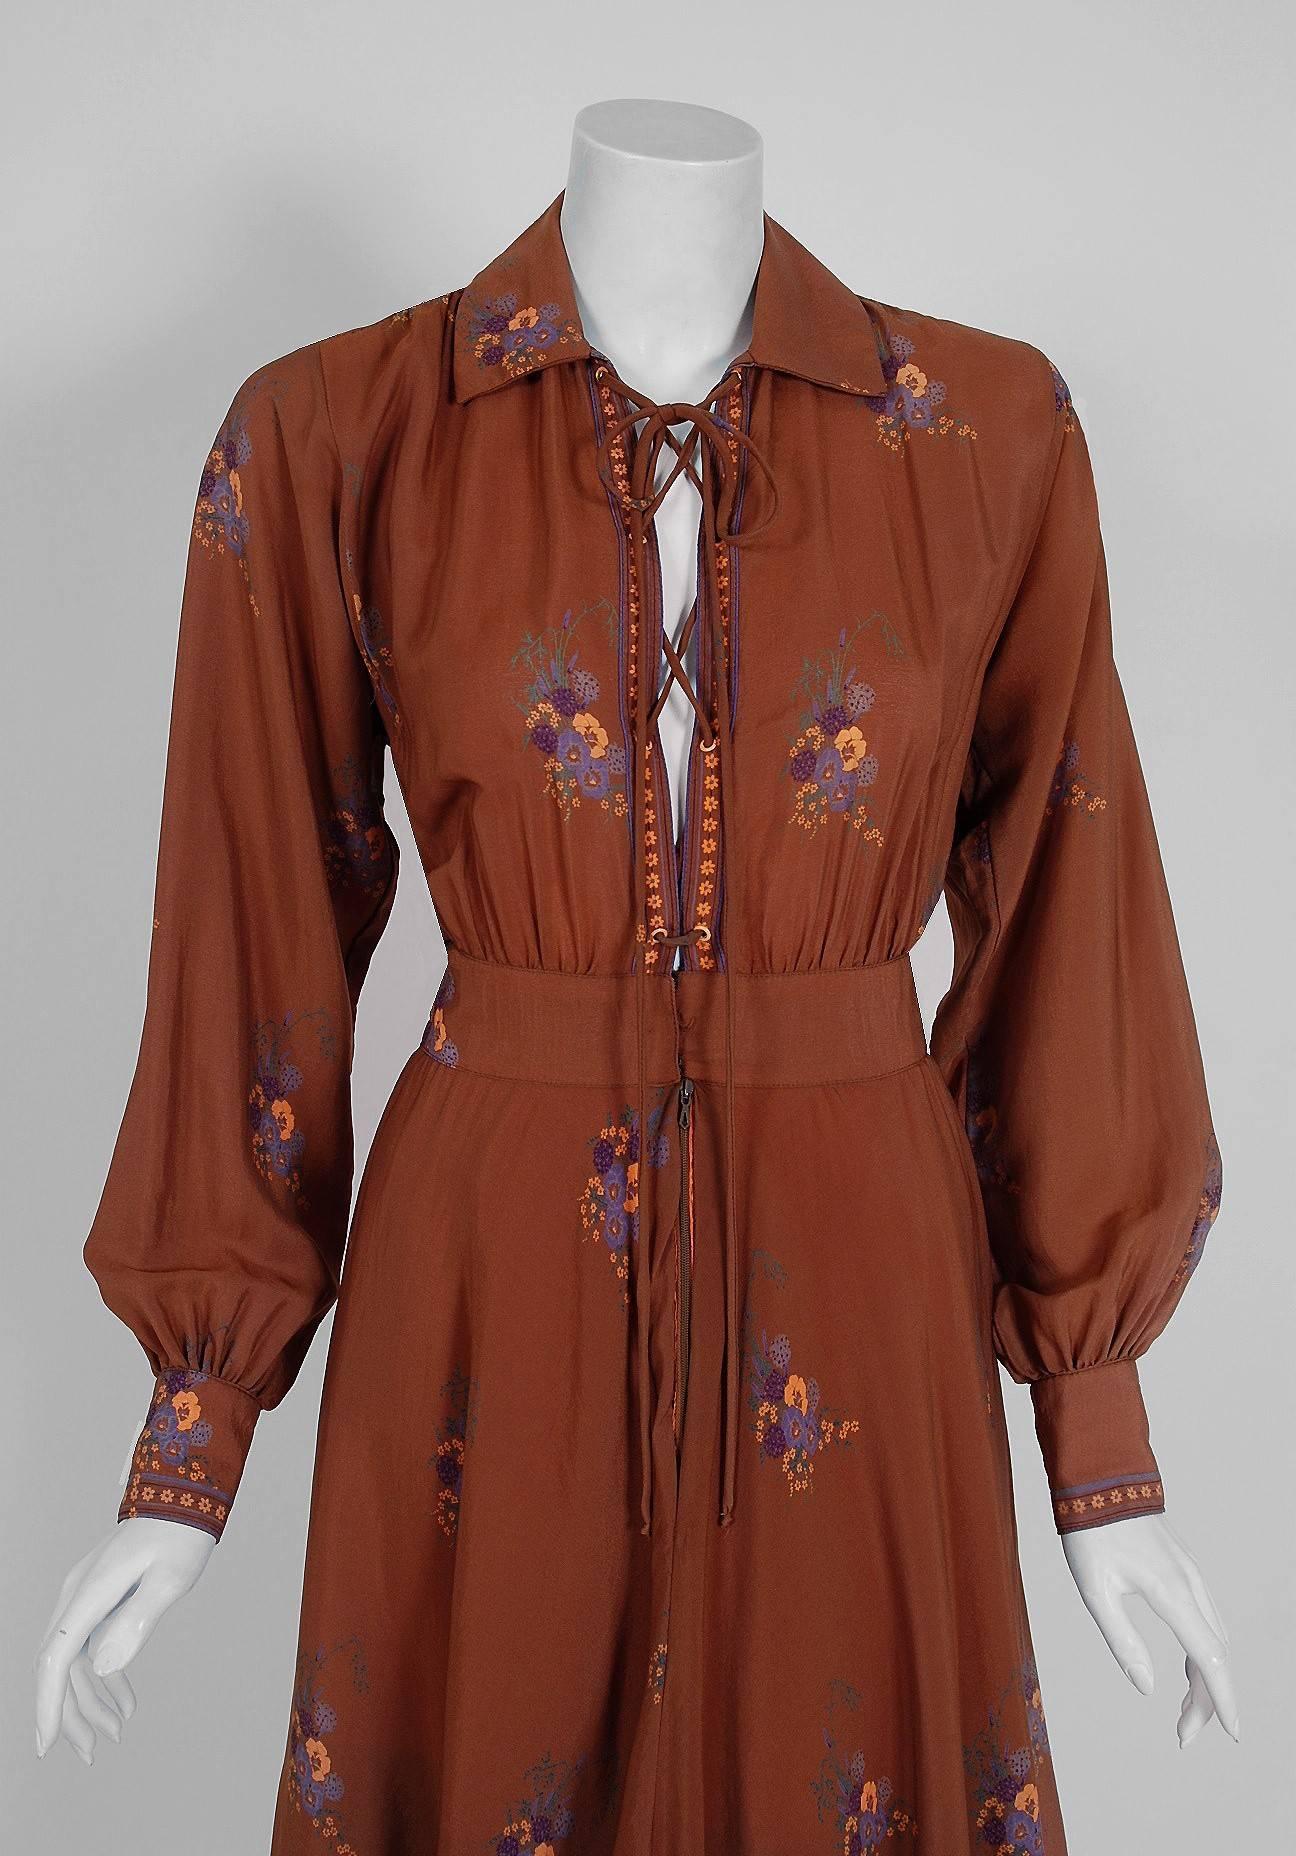 Seductive Ted Lapidus Haute-Couture boutique cinnamon floral print dress from the mid 1970's. After an apprenticeship with Dior, Ted Lapidus started his own fashion house in 1951. In 1963, he created a near scandal in the world of fashion by forming